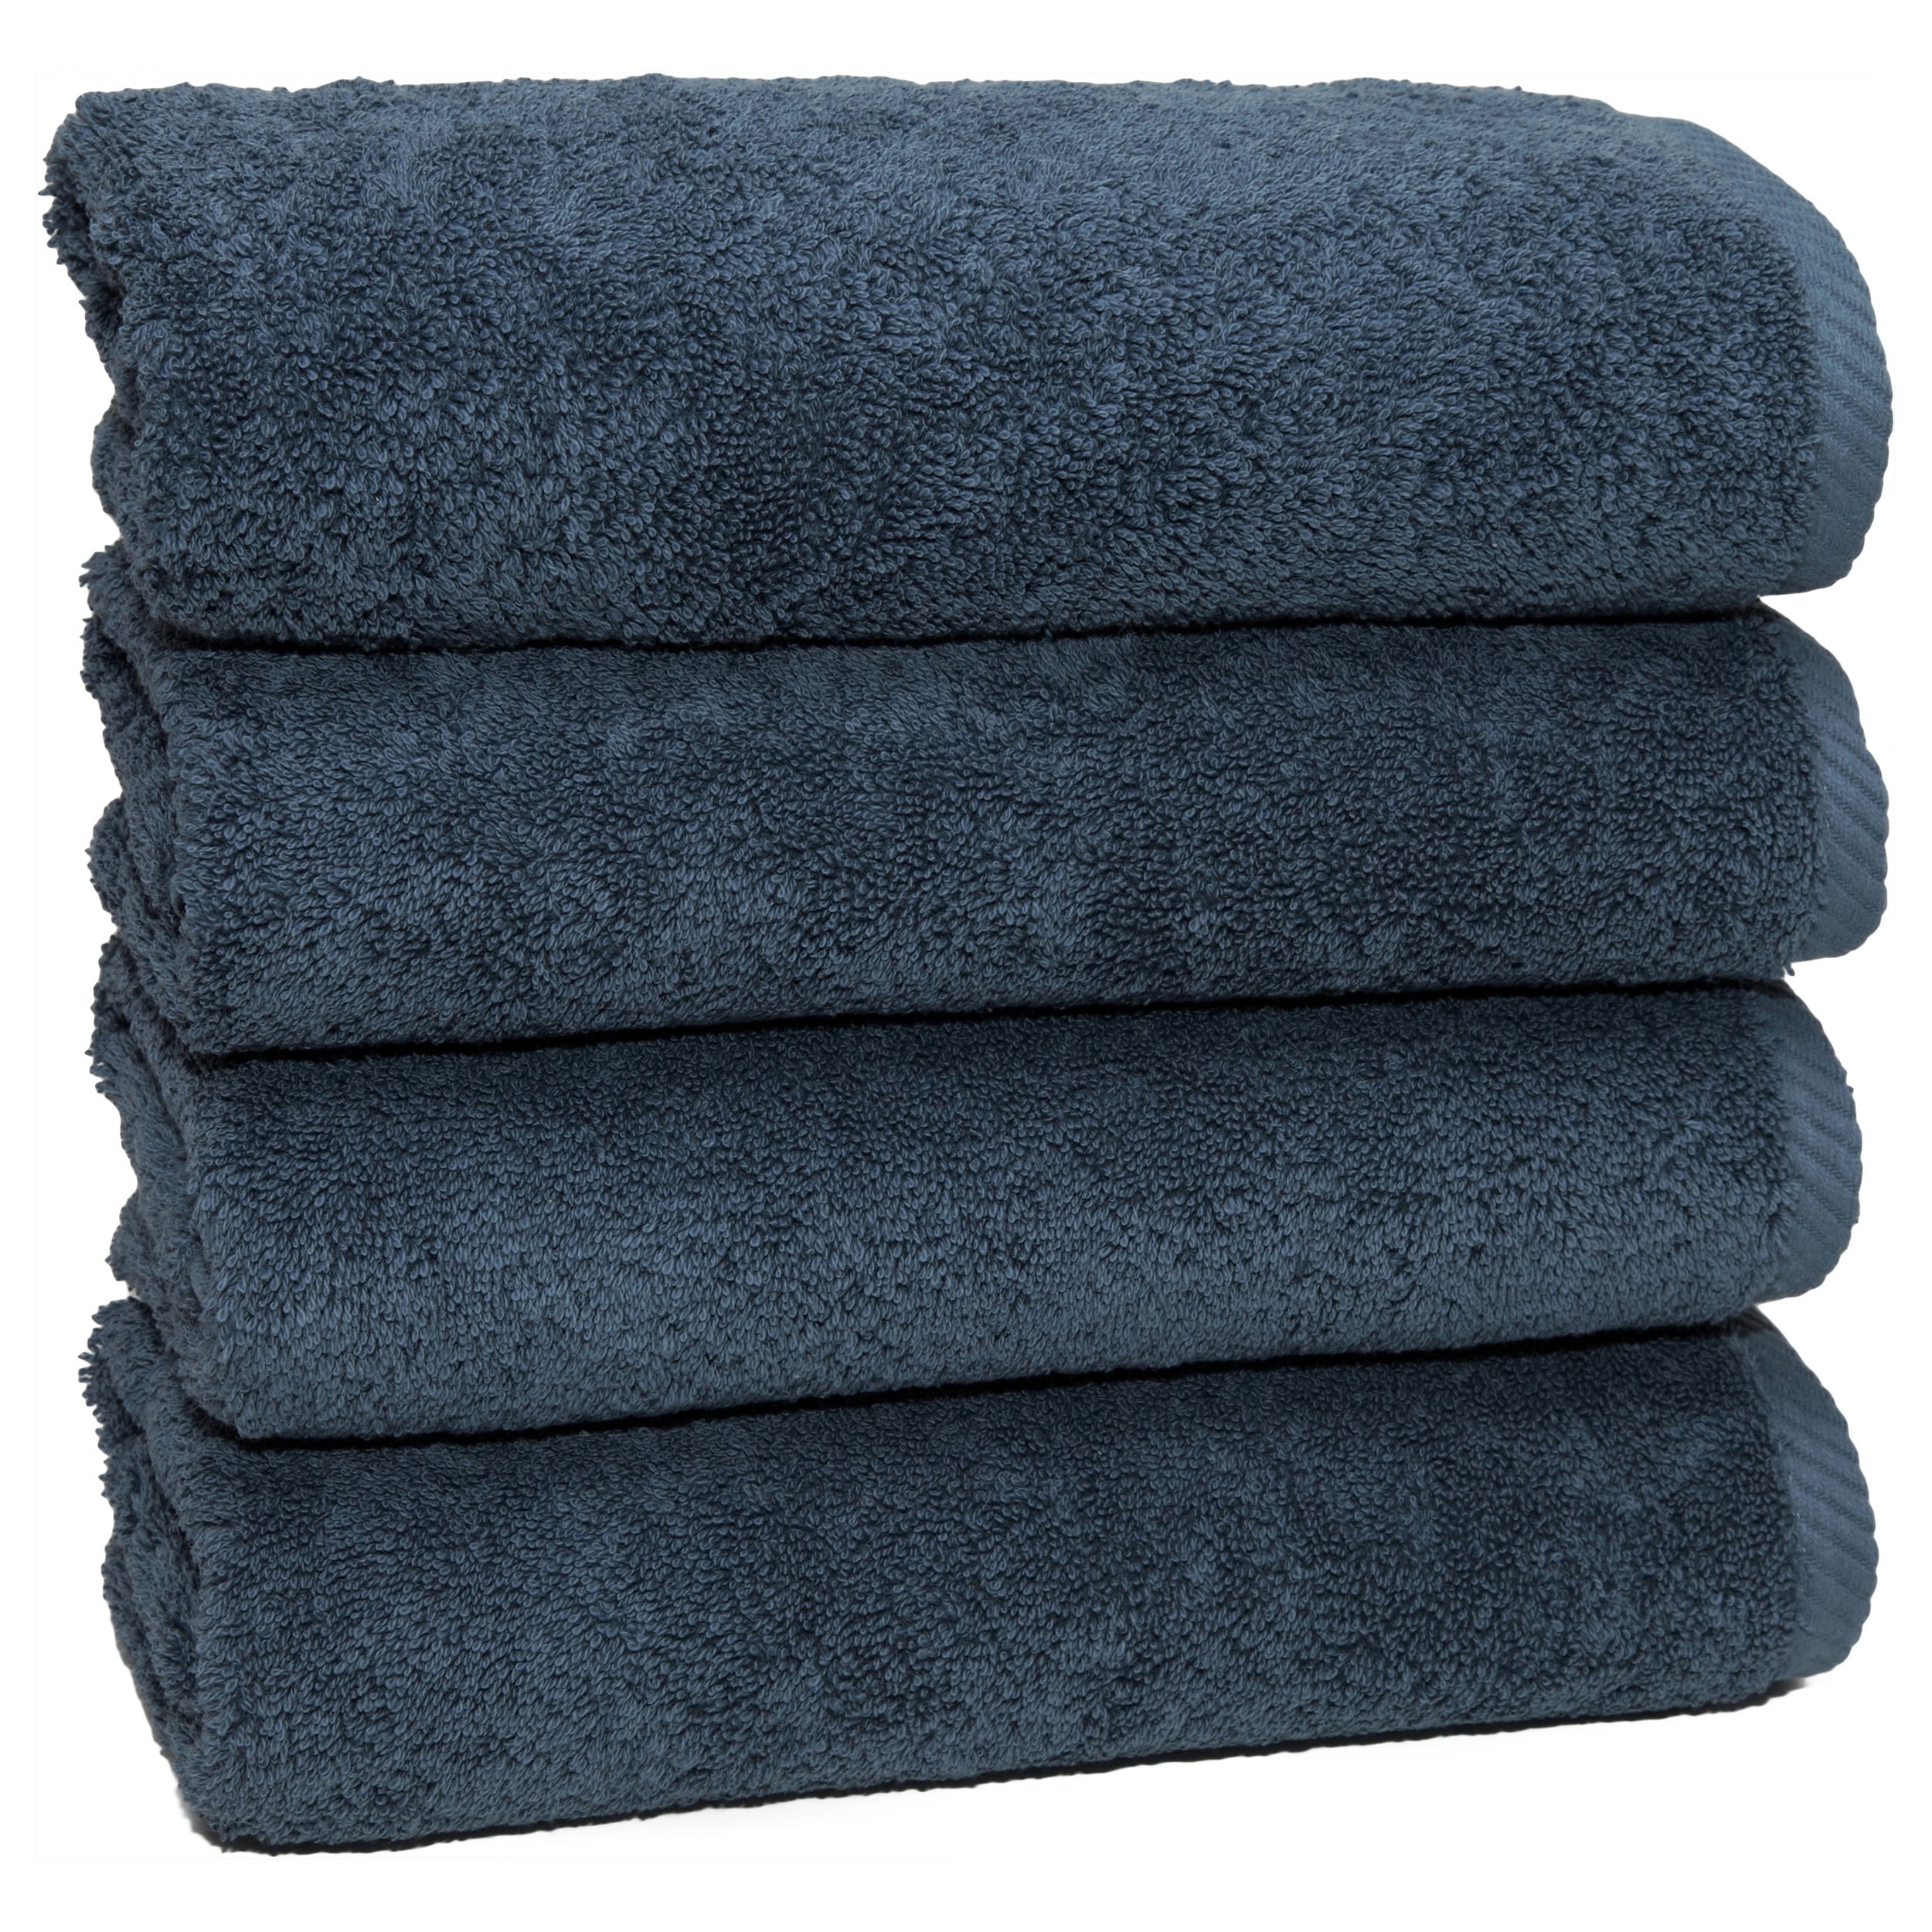 https://ak1.ostkcdn.com/images/products/7594899/Authentic-Soft-Twist-Hotel-and-Spa-Turkish-Cotton-Hand-Towel-Set-of-4-8bbe203c-bc59-47ce-84d0-94f784752e53.jpg